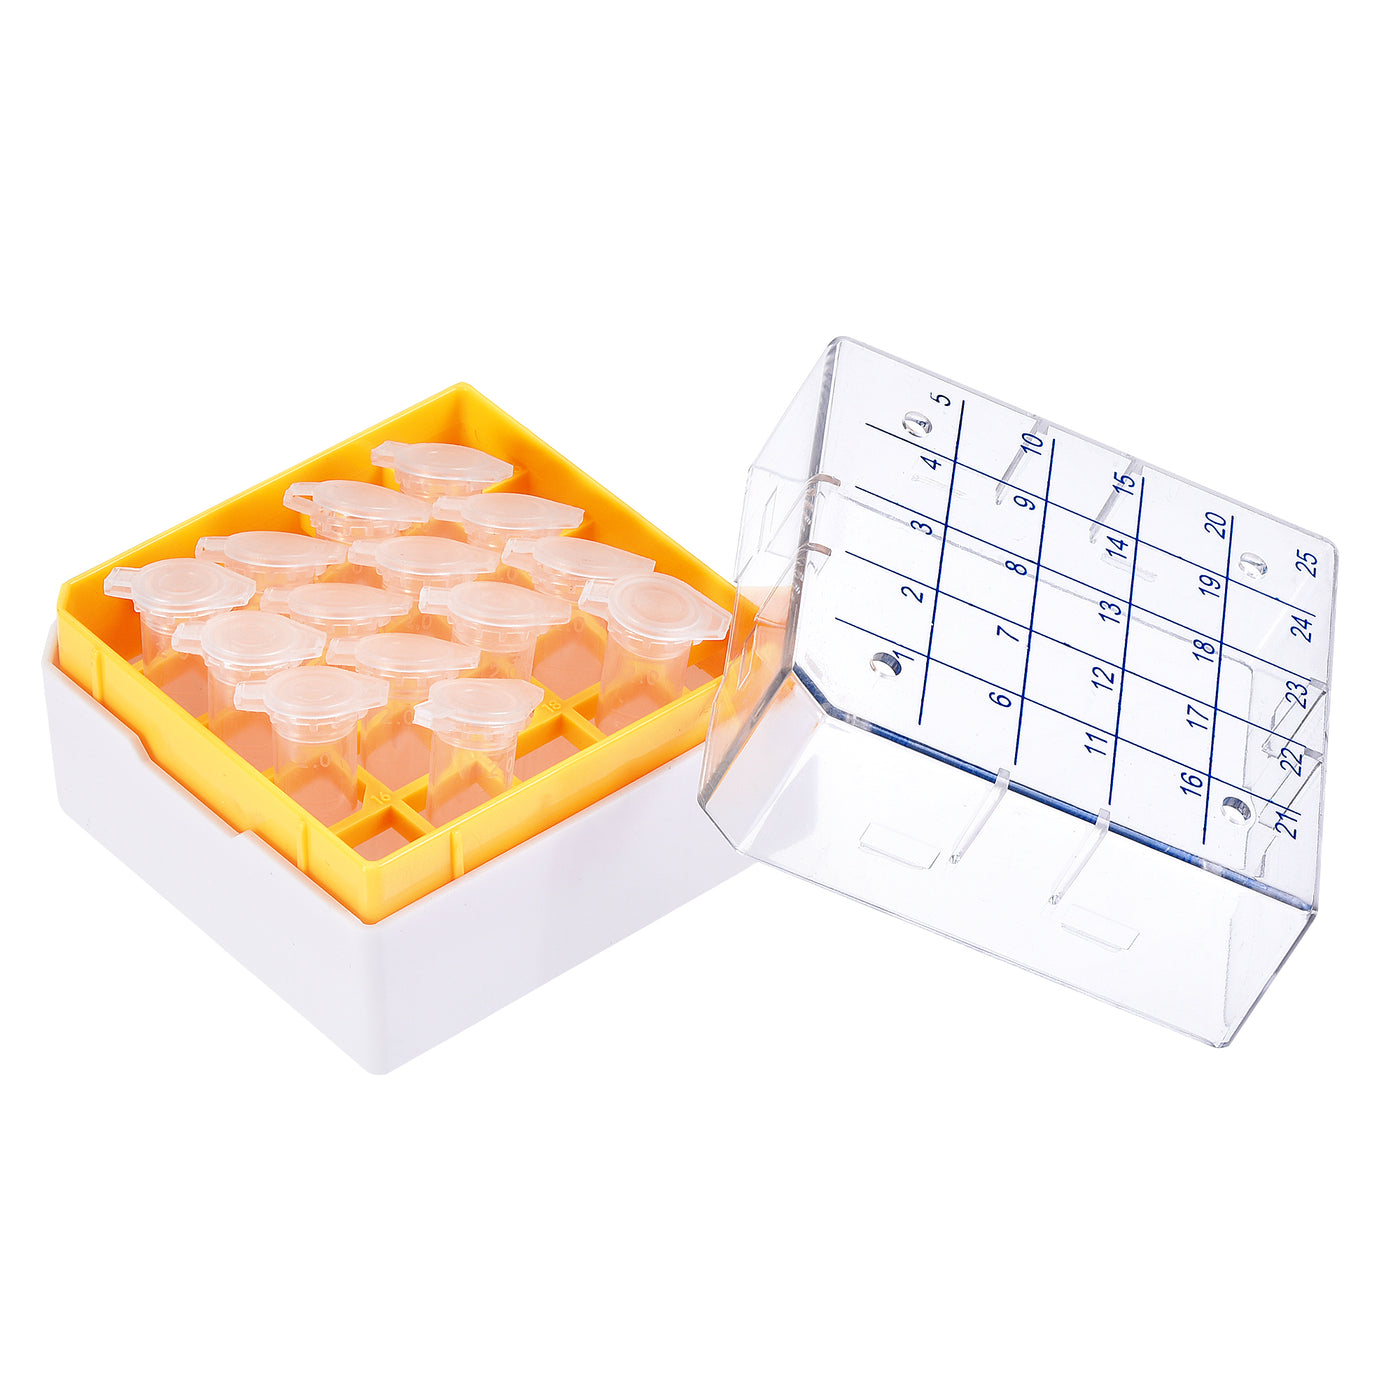 uxcell Uxcell Freezer Tube Box 25 Places Polypropylene Holder Rack for 1.8/2ml Microcentrifuge Tubes, Yellow